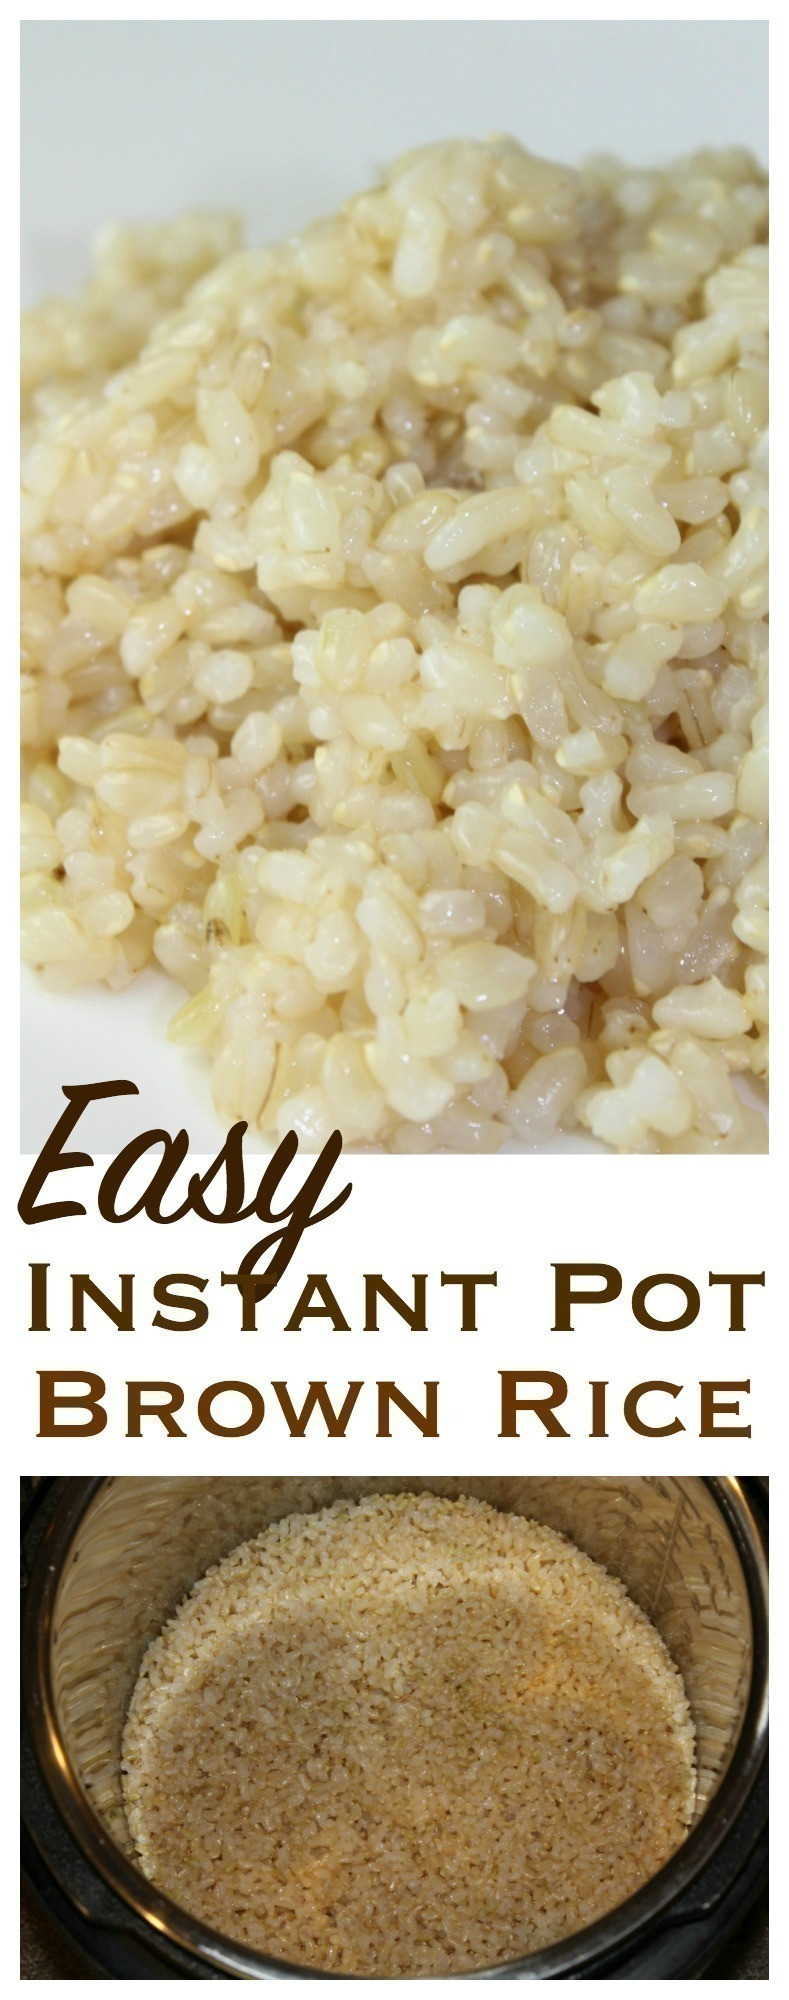 Brown Rice In Instant Pot
 Easy Brown Rice in the Instant Pot